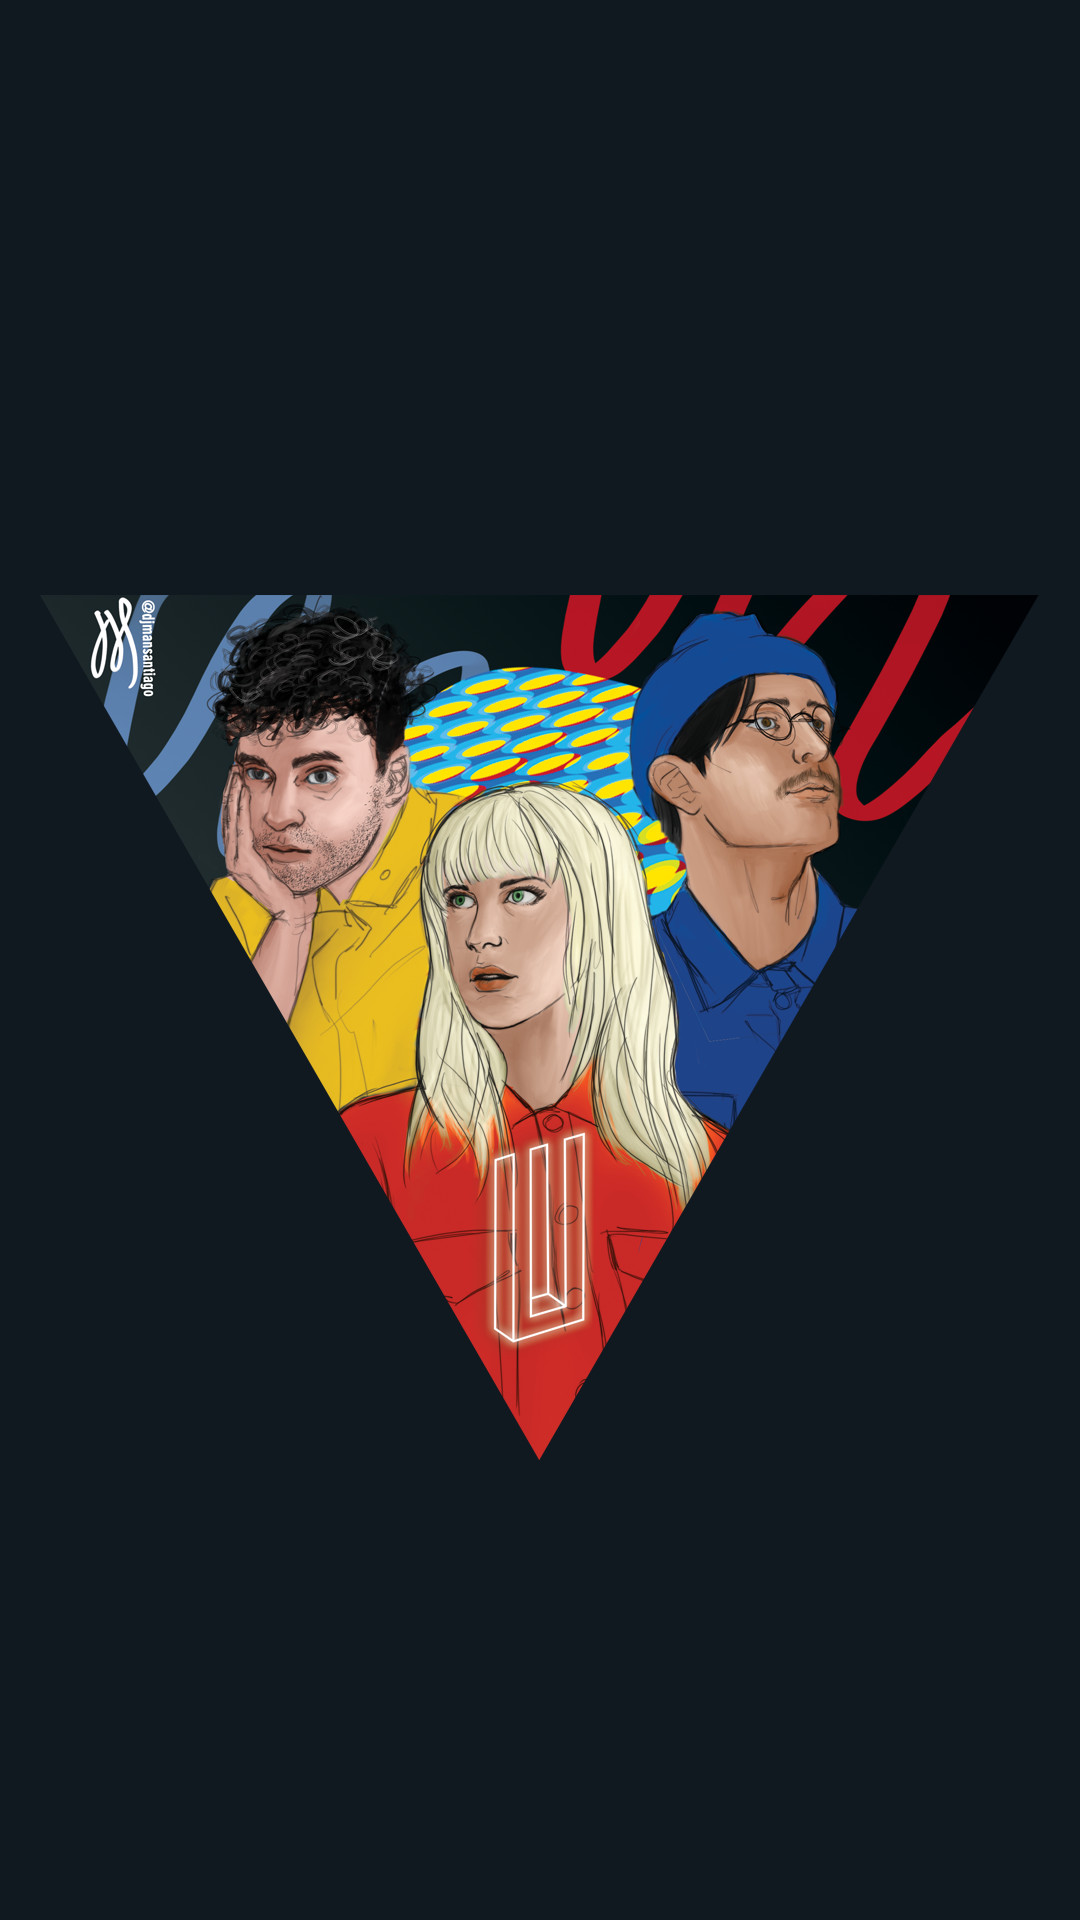 1080x1920 Some Paramore wallpapers I made to celebrate the start of Tour Four! -  Album on Imgur